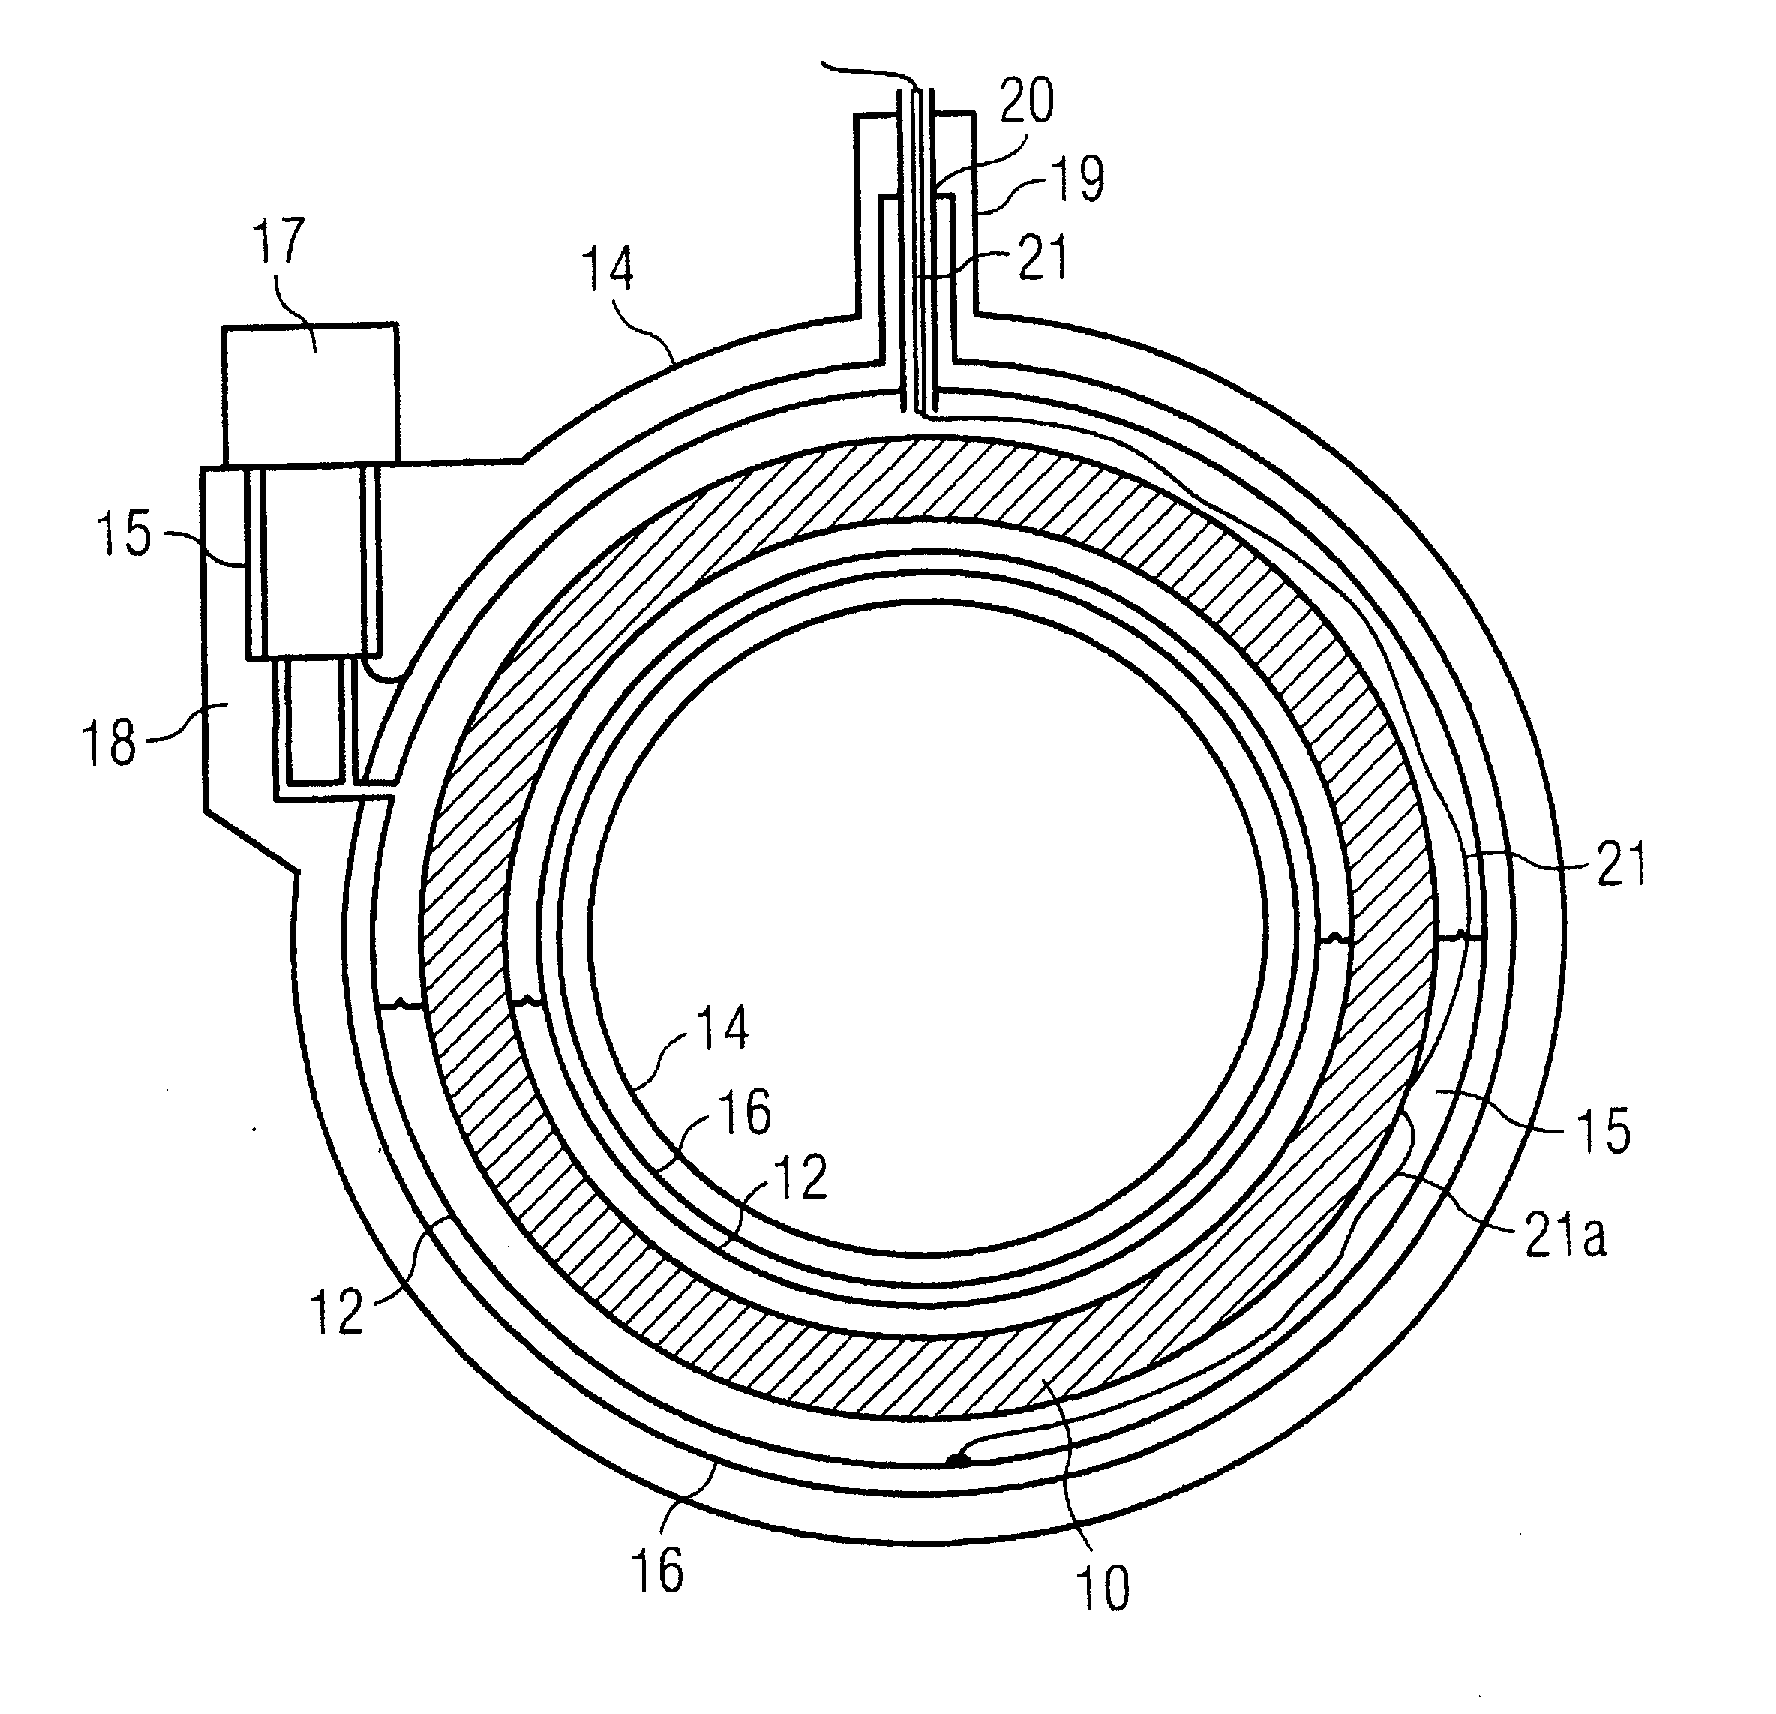 Methods and apparatus for detection of air ingress into cryogen vessels